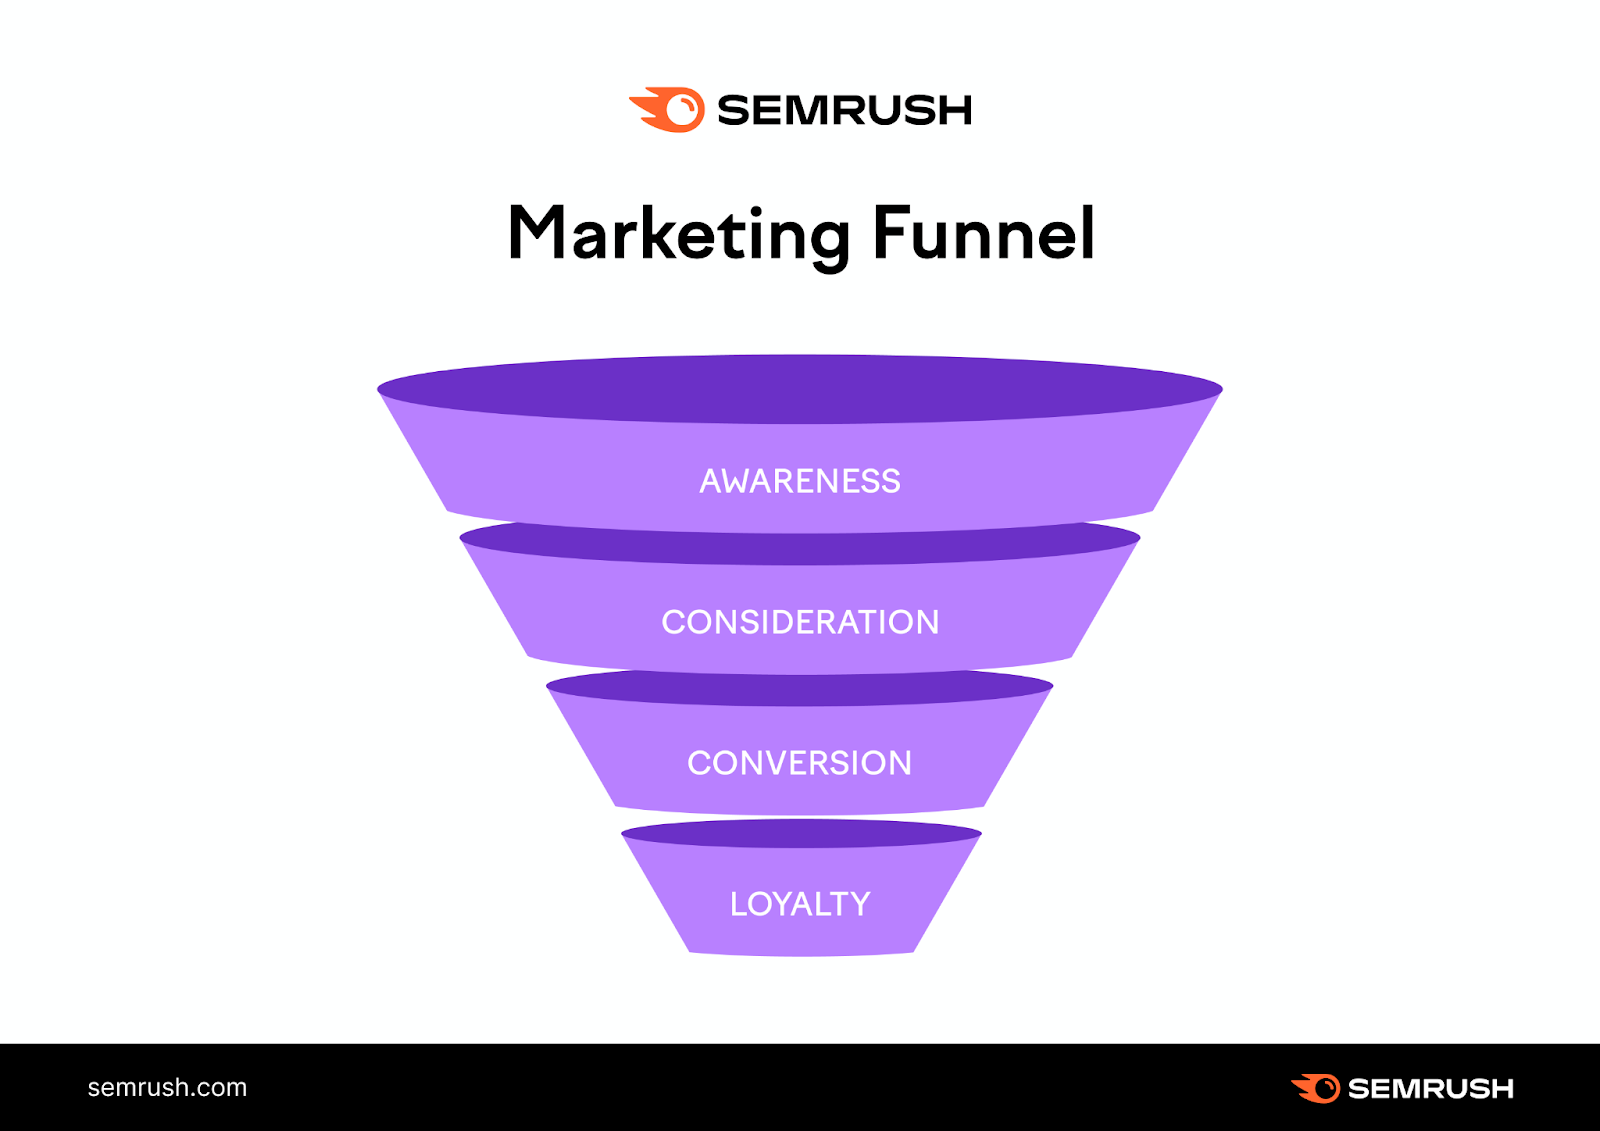 Marketing funnel with "Awareness," "Consideration," "Conversion," and "Loyalty" stages